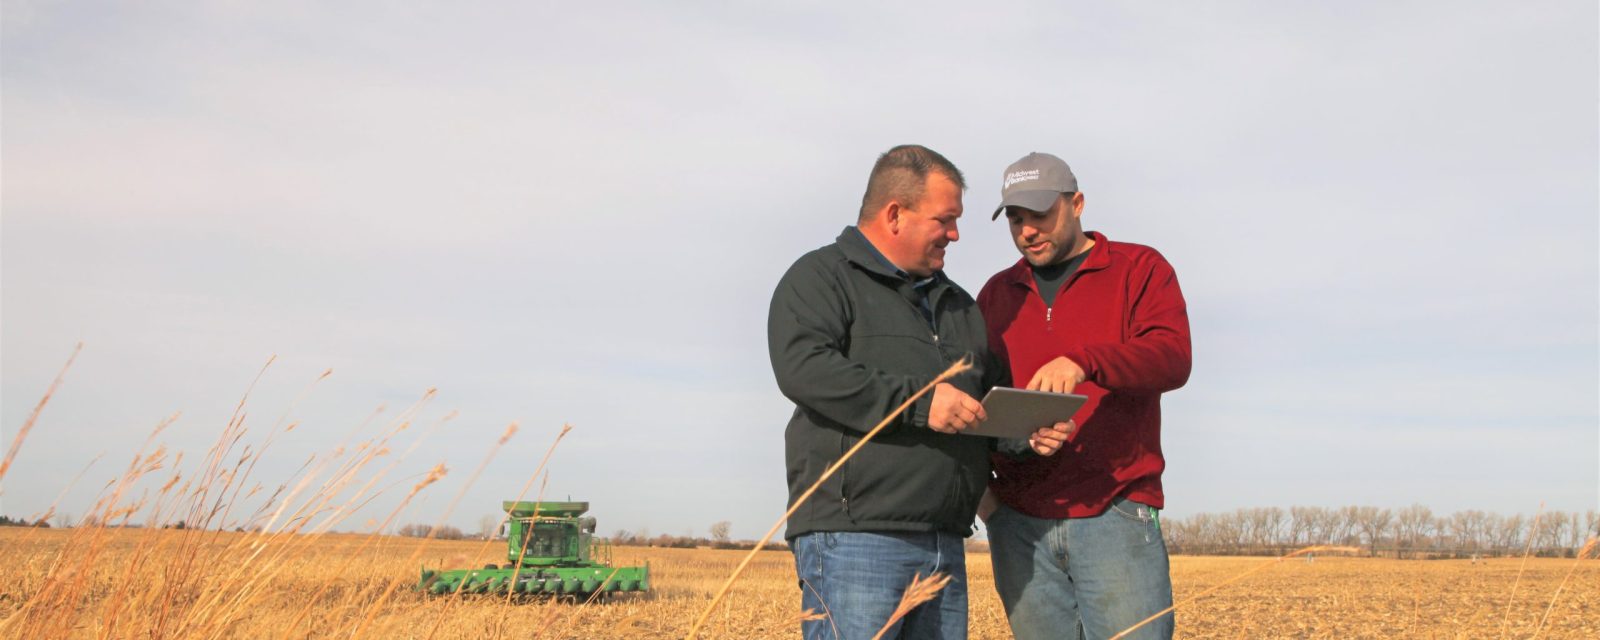 Josh Gossman, Crop Insurance Agent out of Pierce and a farmer in the field at harvest